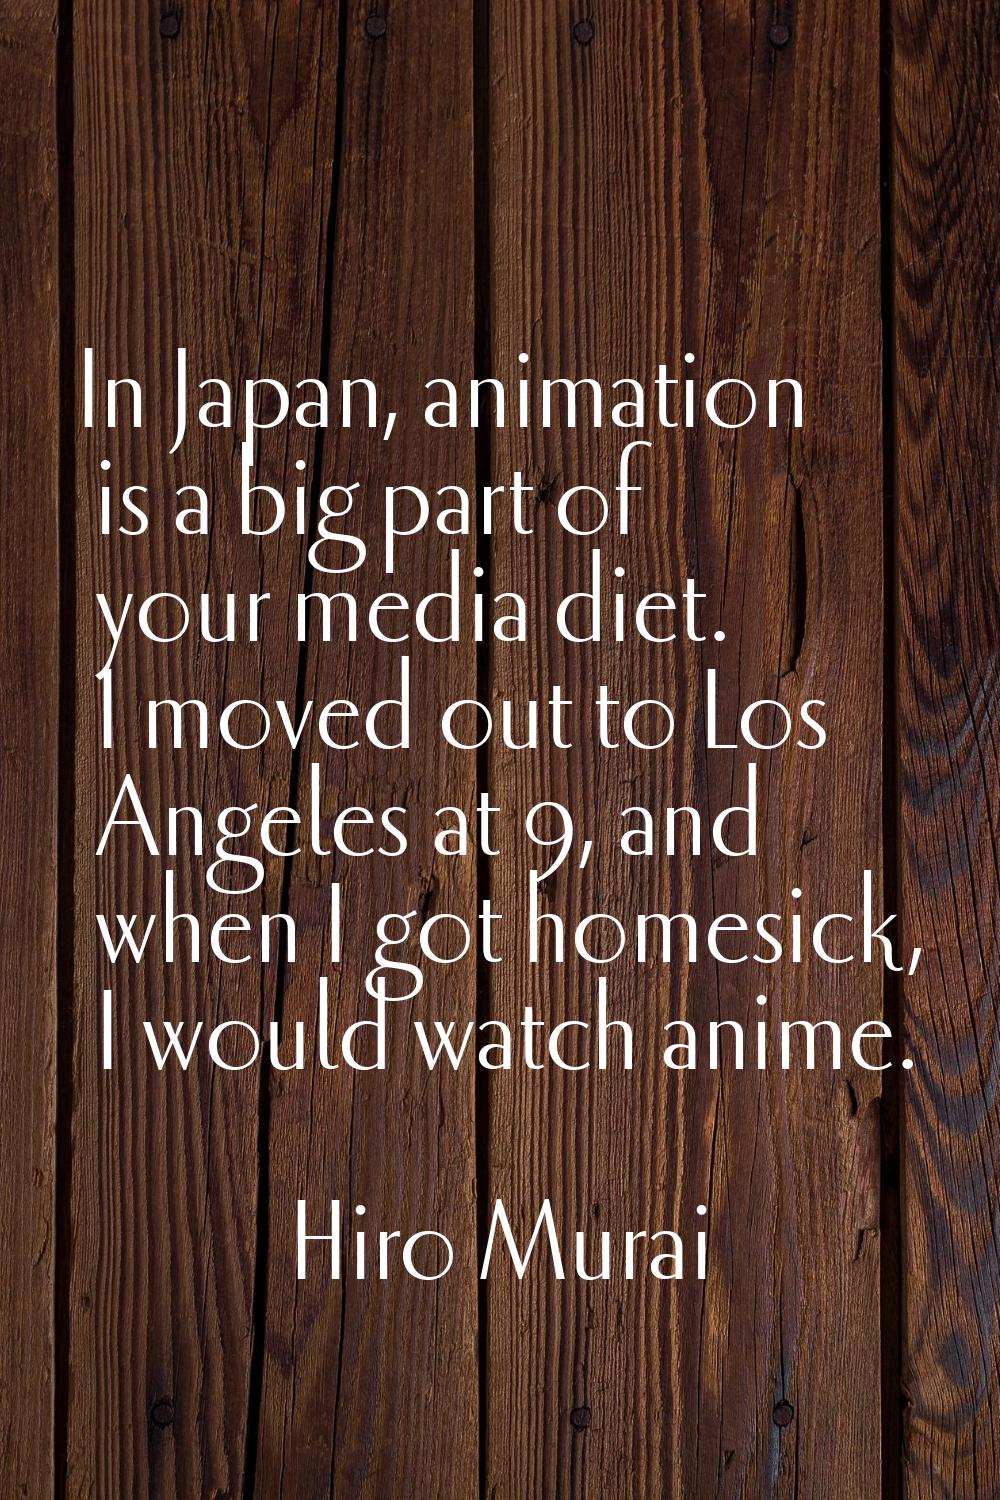 In Japan, animation is a big part of your media diet. I moved out to Los Angeles at 9, and when I g